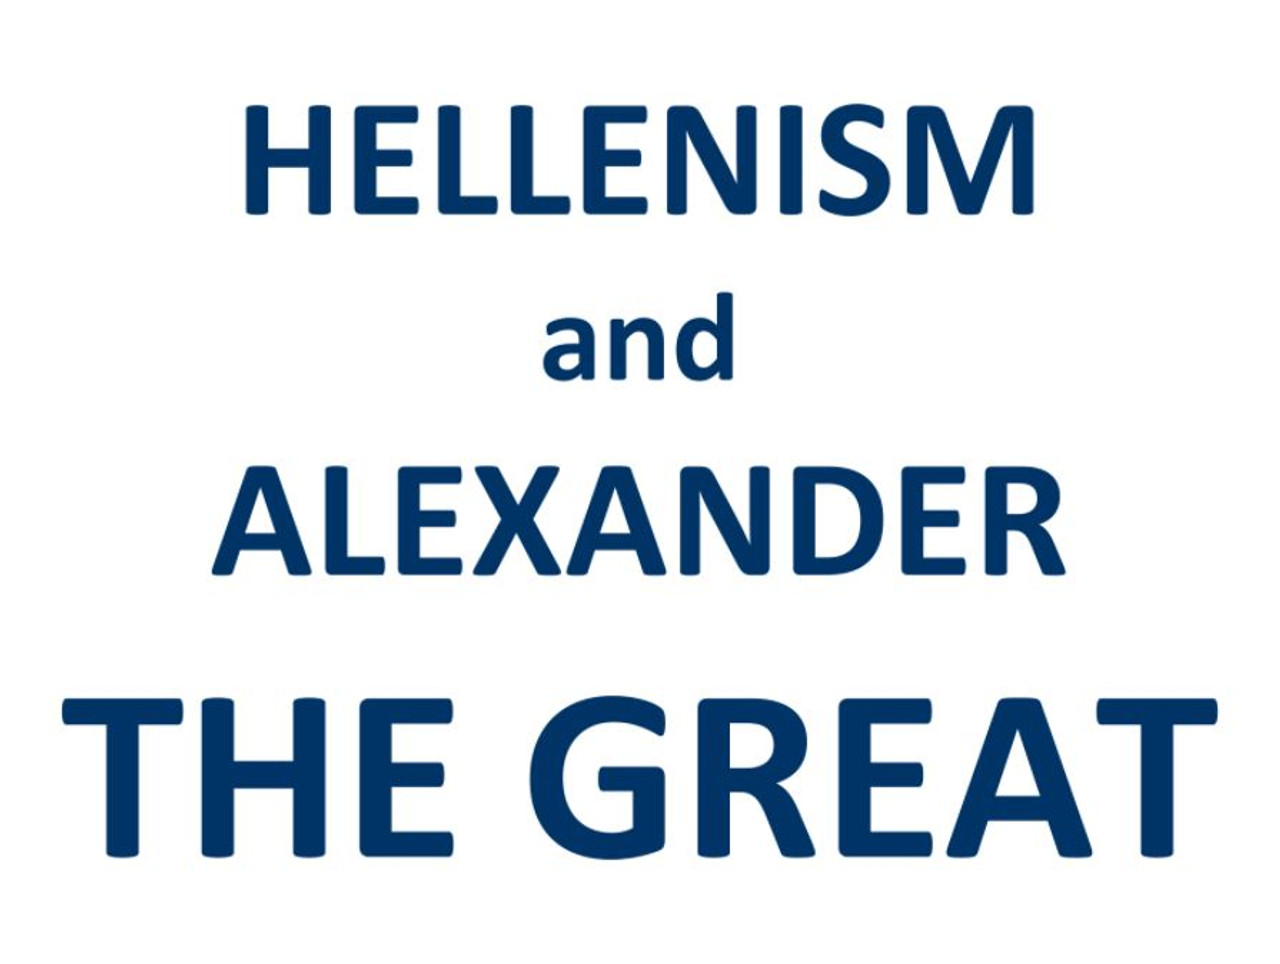 Hellenism and Alexander the Great